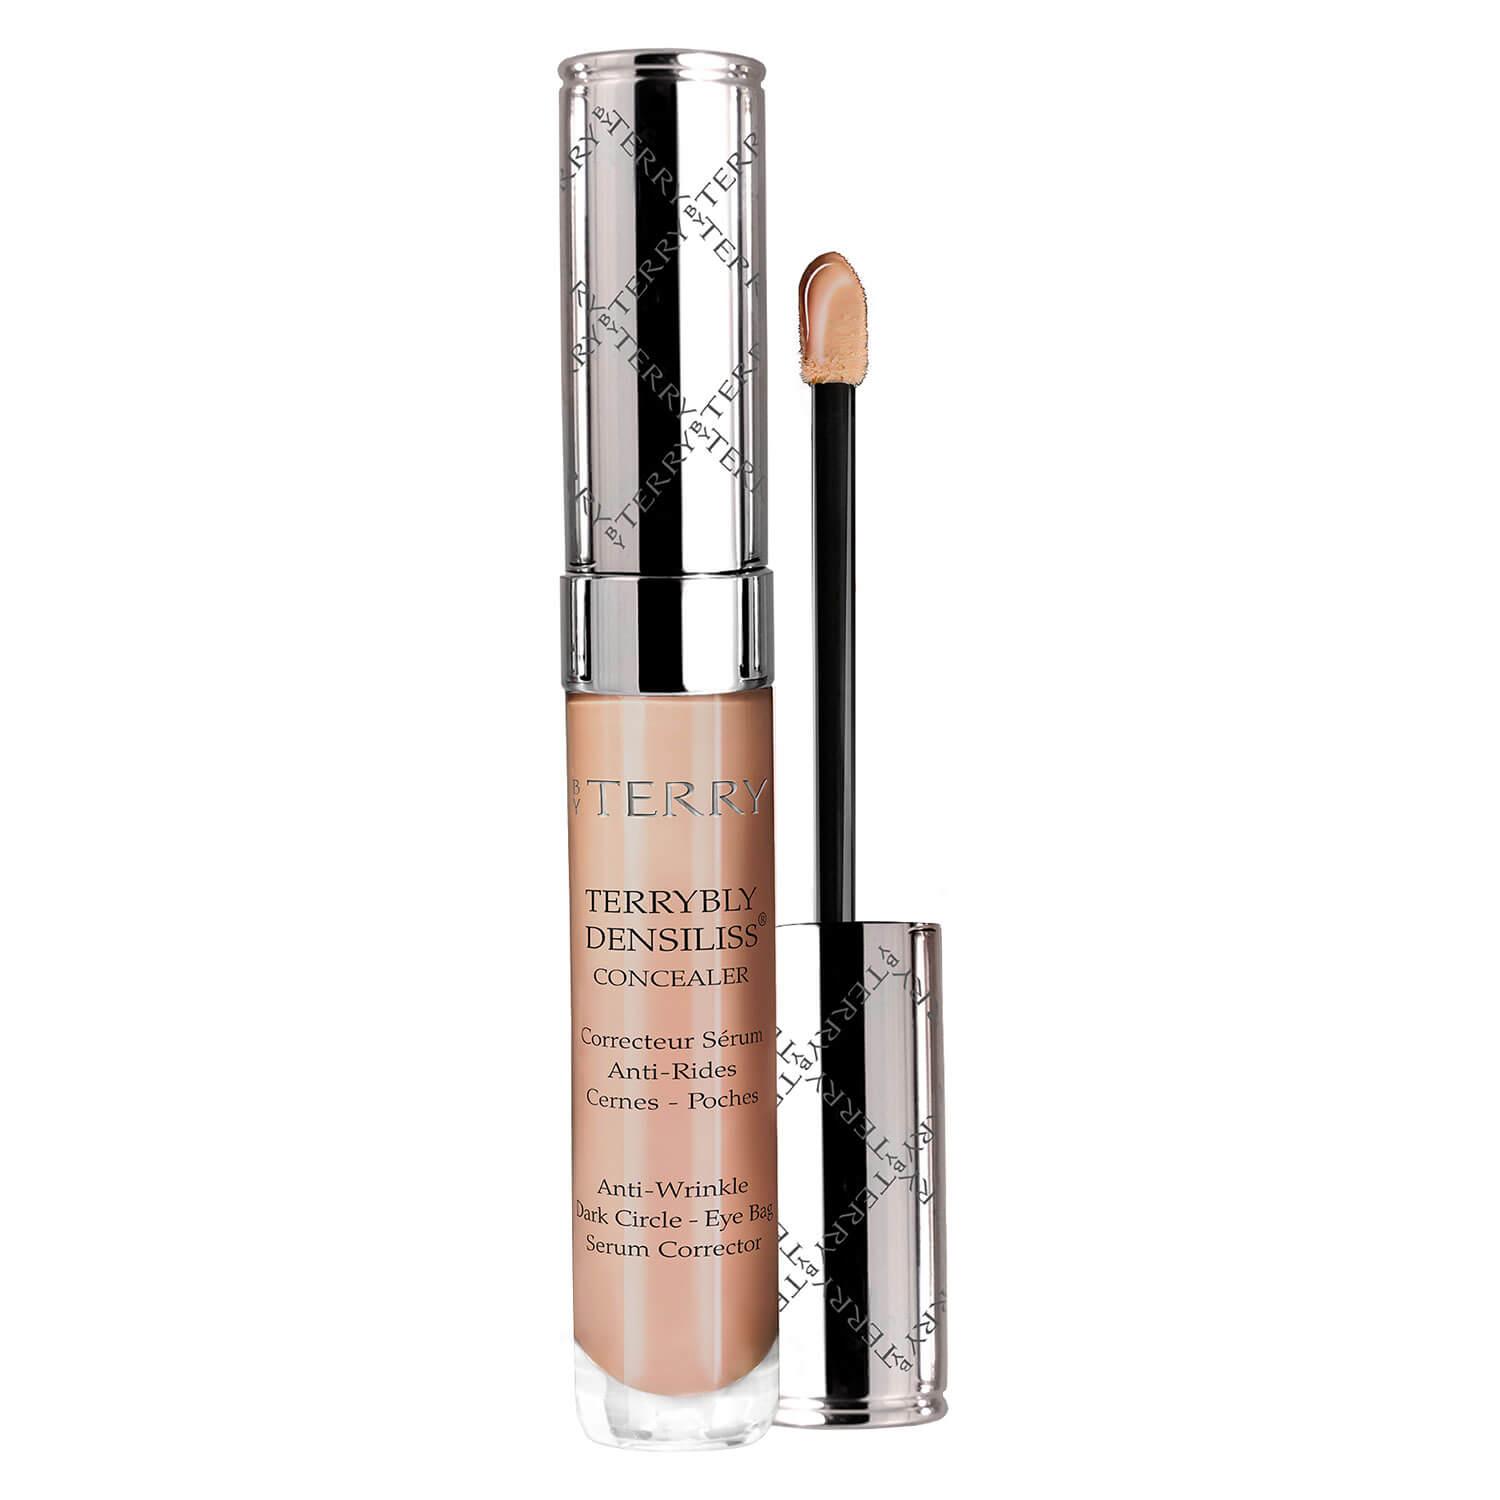 By Terry Concealer - Terrybly Densiliss Concealer 6 Sienna Copper